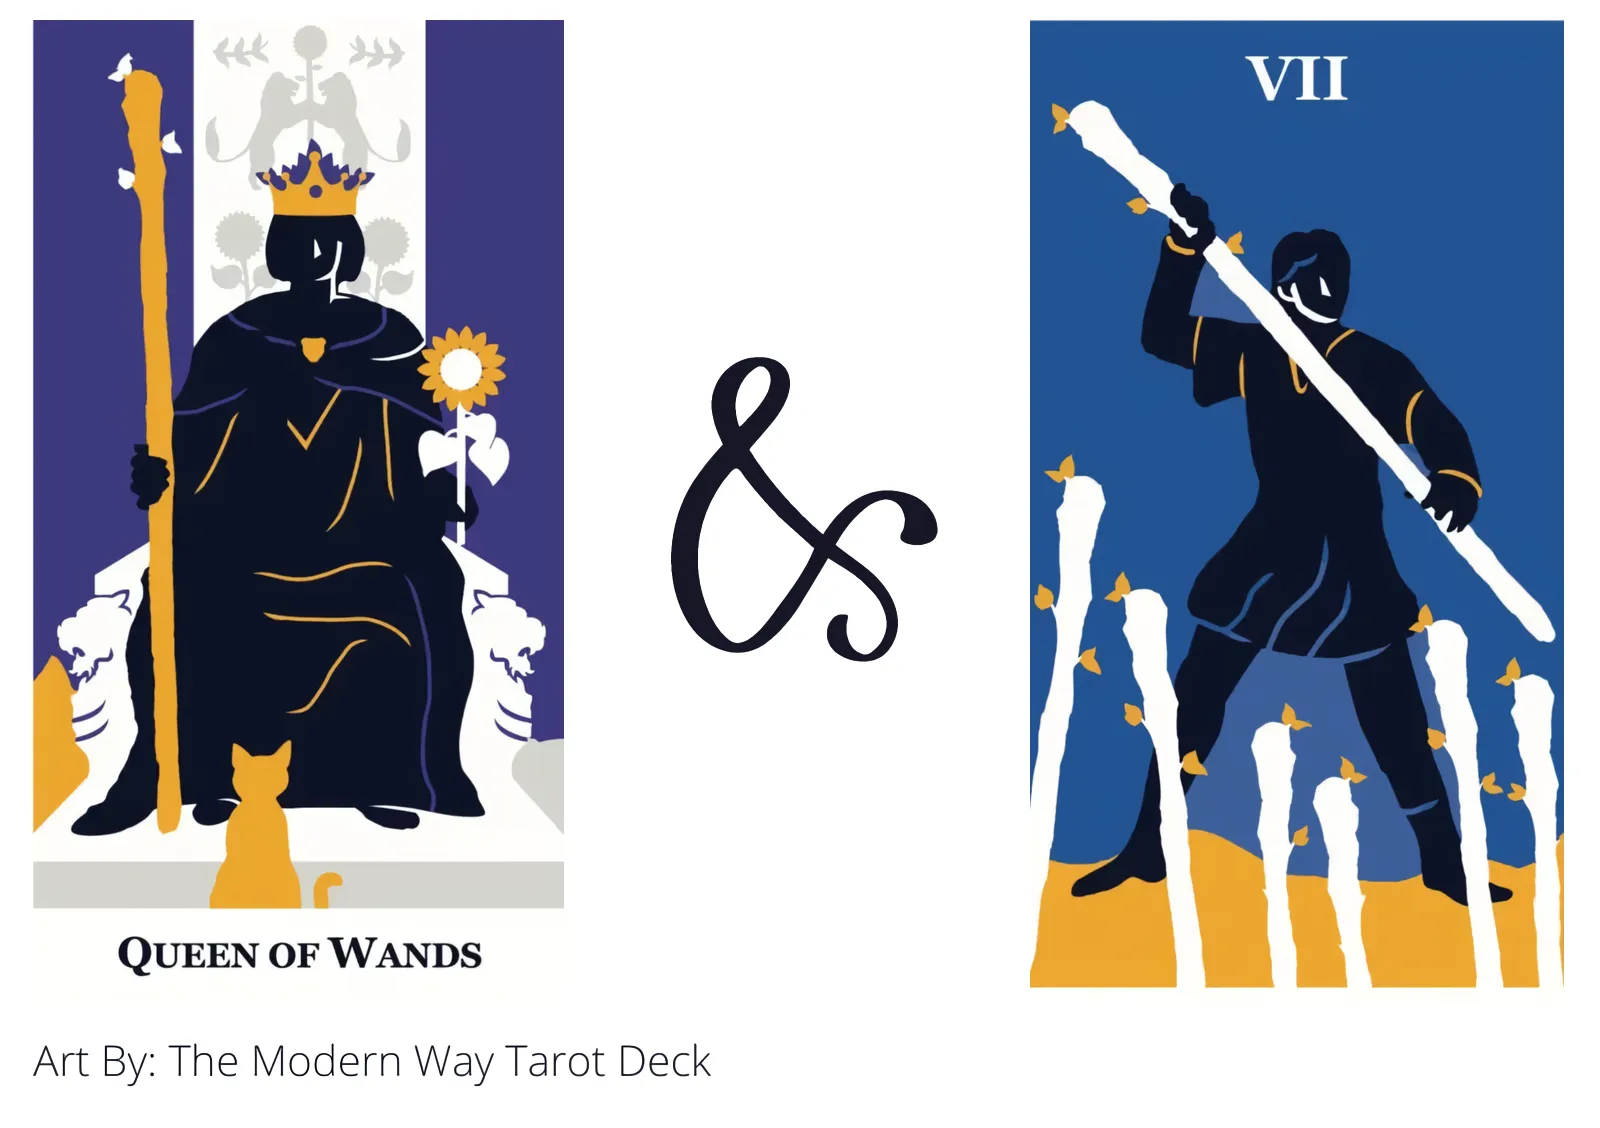 queen of wands and seven of wands tarot cards together